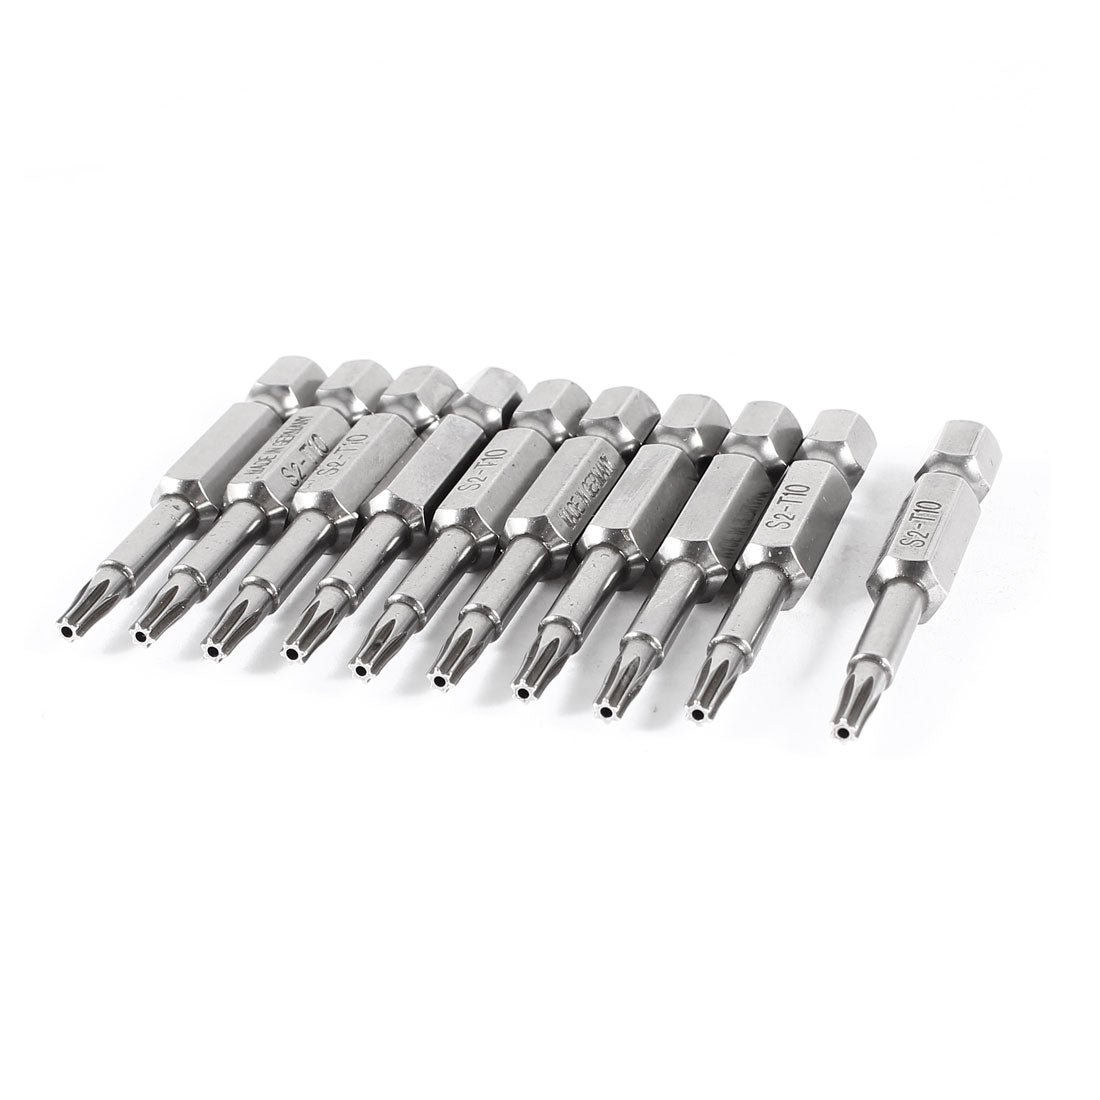 uxcell Uxcell 10 Pcs Magnetic 50mm Long 1/4" Shank Torx Point Tip T10 Power Driver Screwdriver Bits